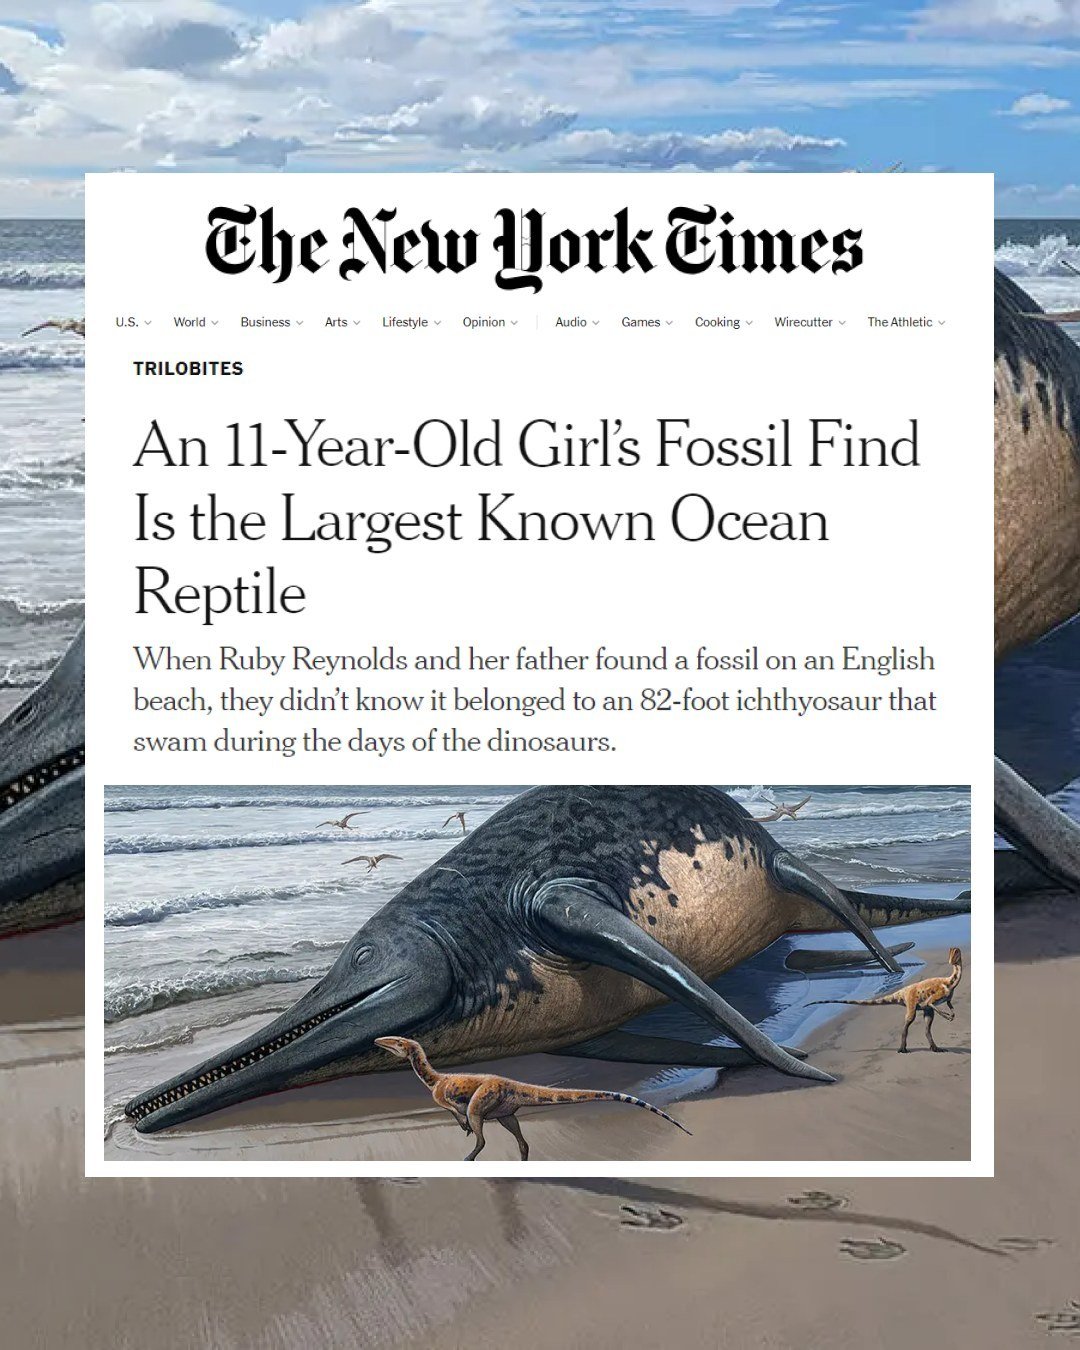 An incredible find of an incredible species.⁠
⁠
From the @newyorktimes: &ldquo;In 1811, a 12-year-old girl named Mary Anning discovered a fossil on the beach near her home in southwestern England &mdash; the first scientifically identified specimen o